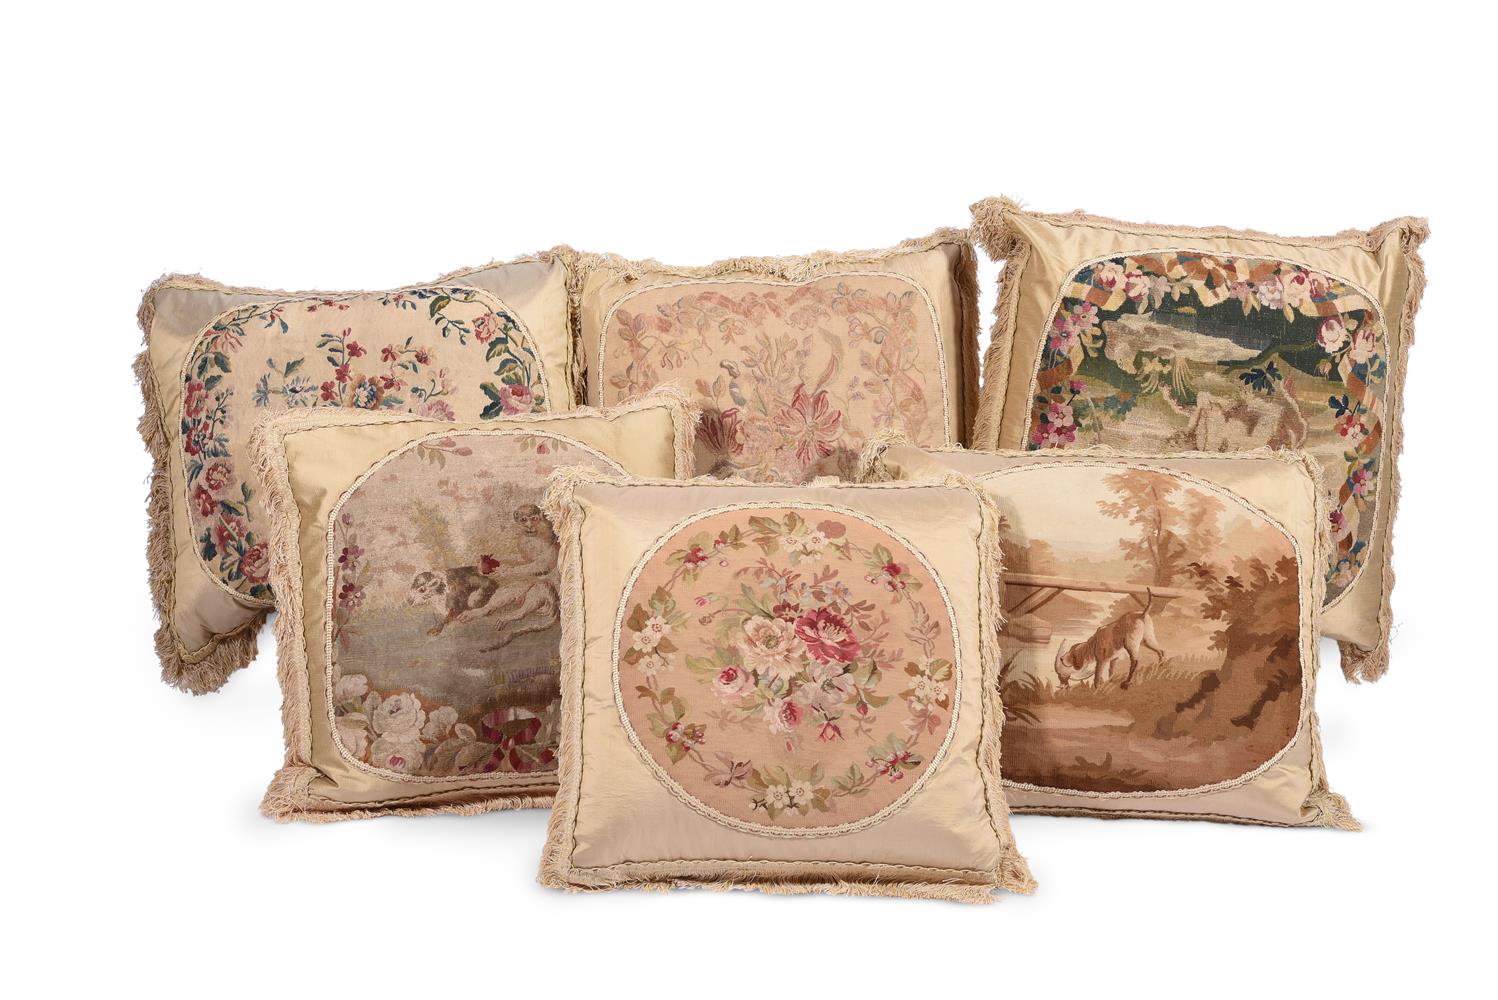 SIX LARGE CUSHIONS INCORPORATING 18TH CENTURY TAPESTRY AND LATER FABRIC